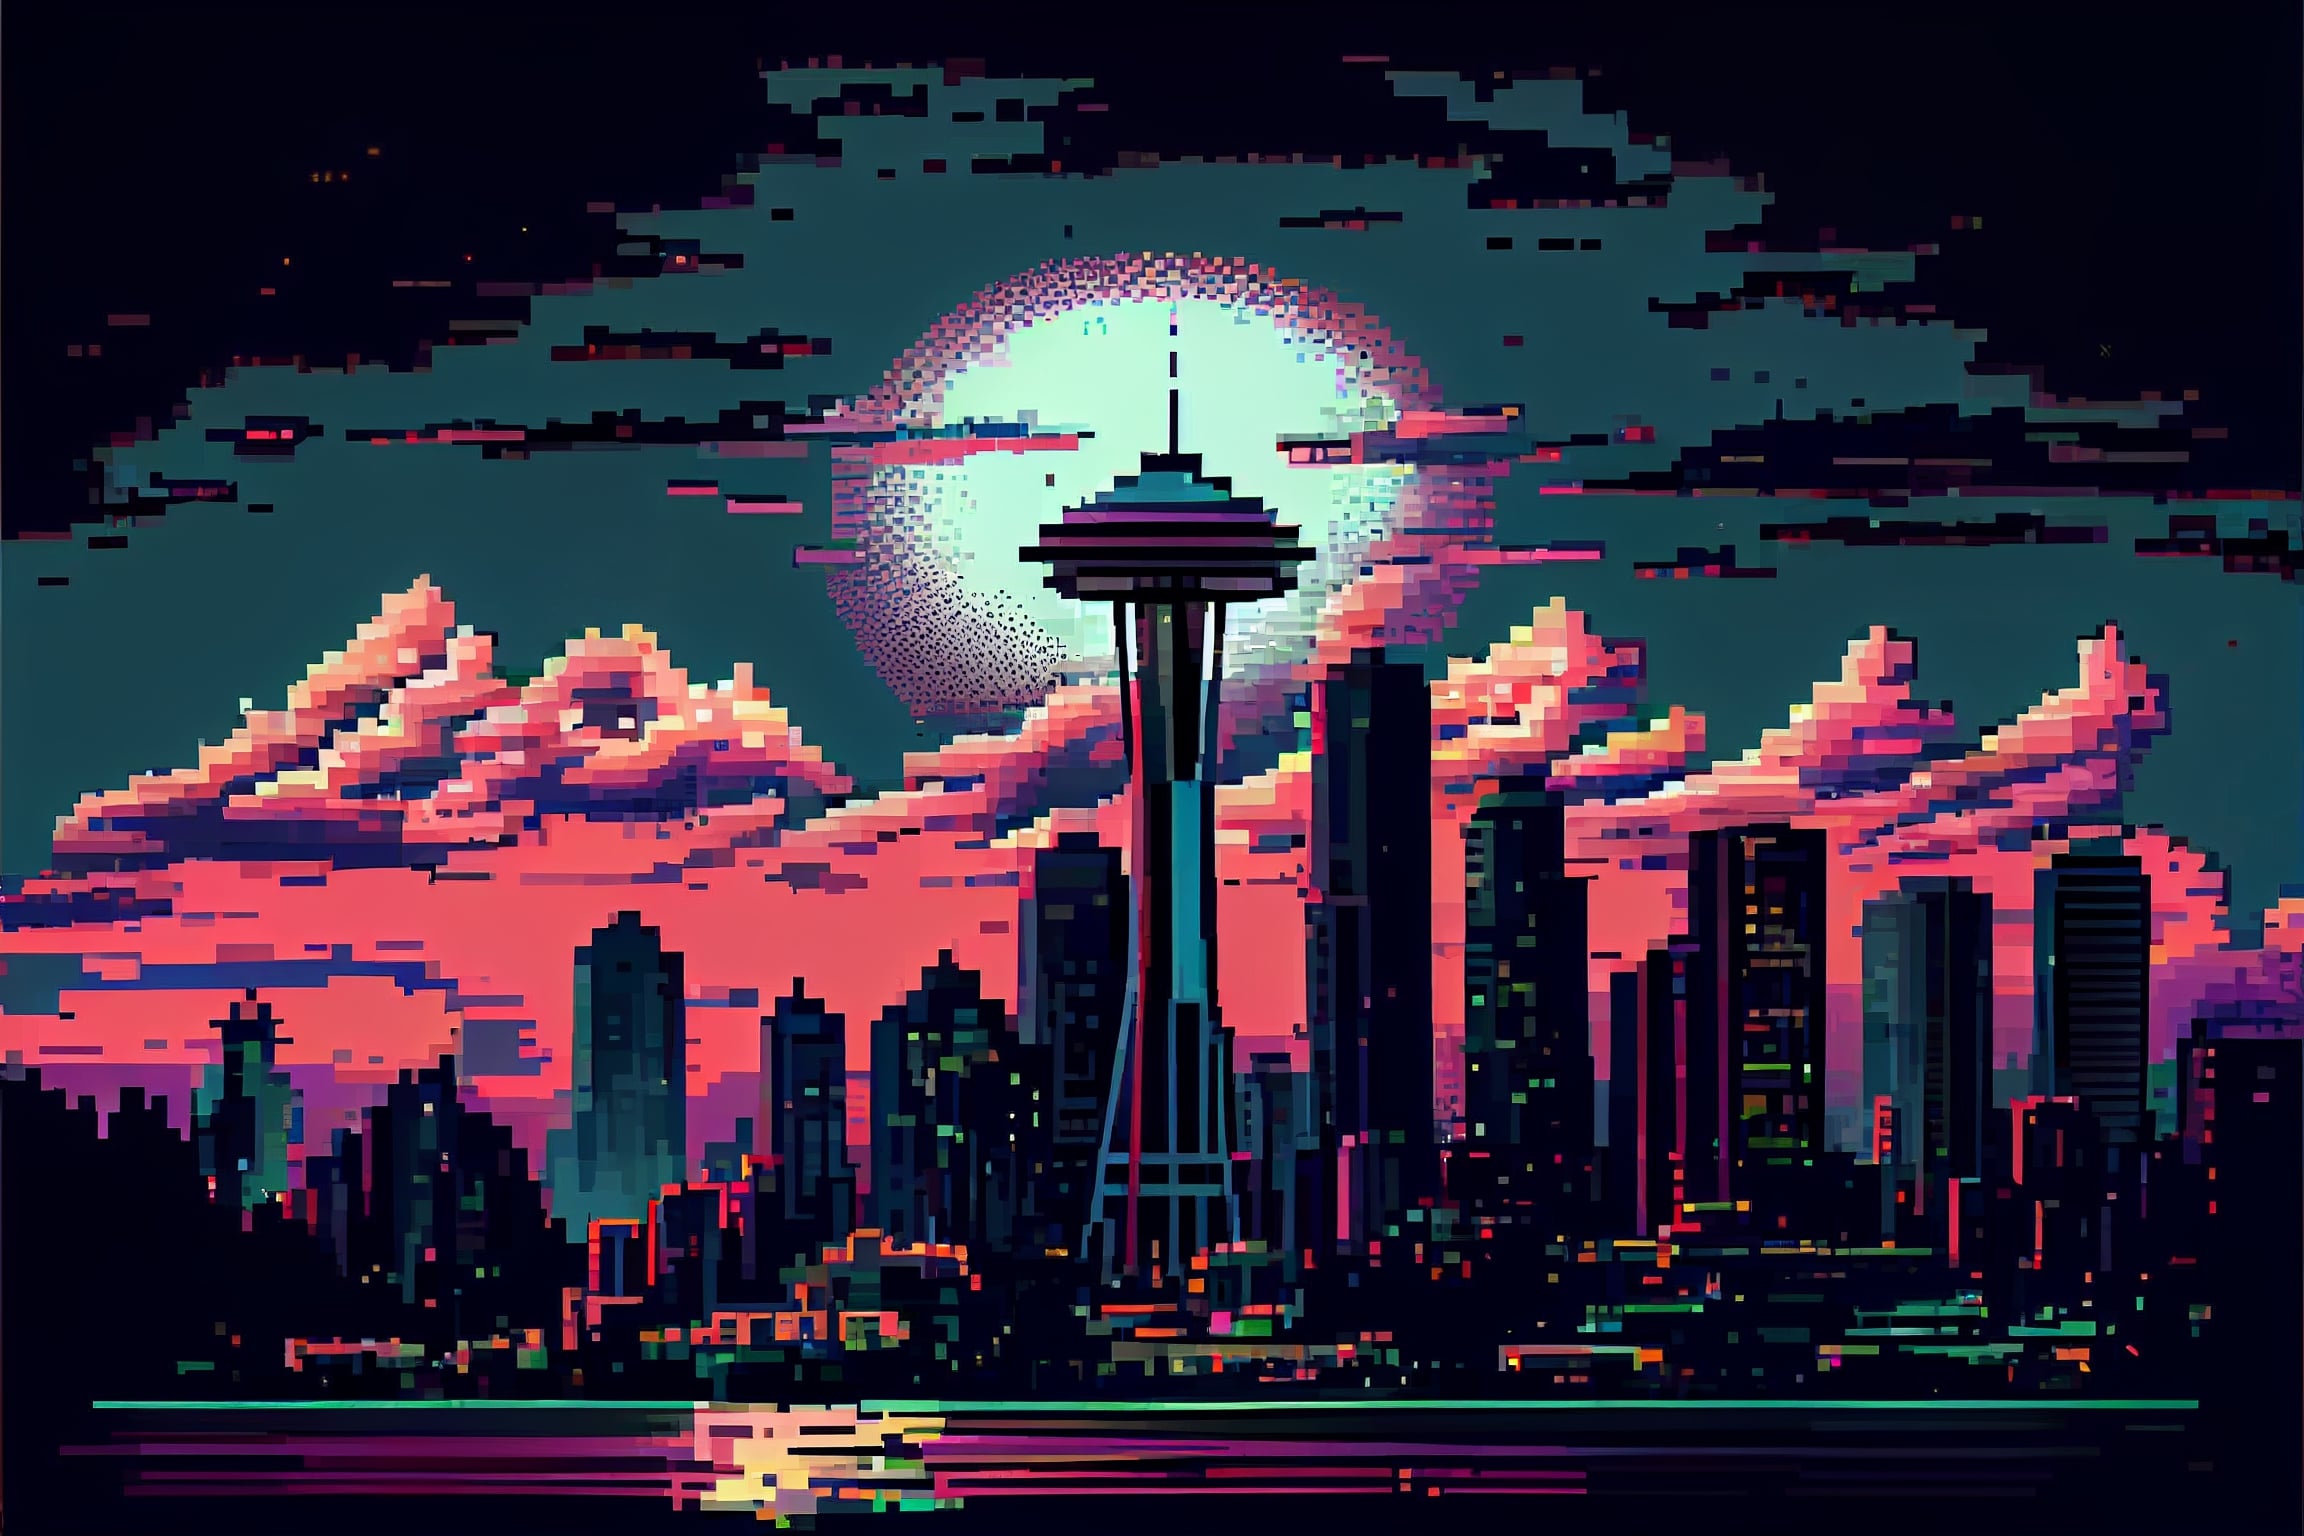 Pixel art picture of a city skyline.